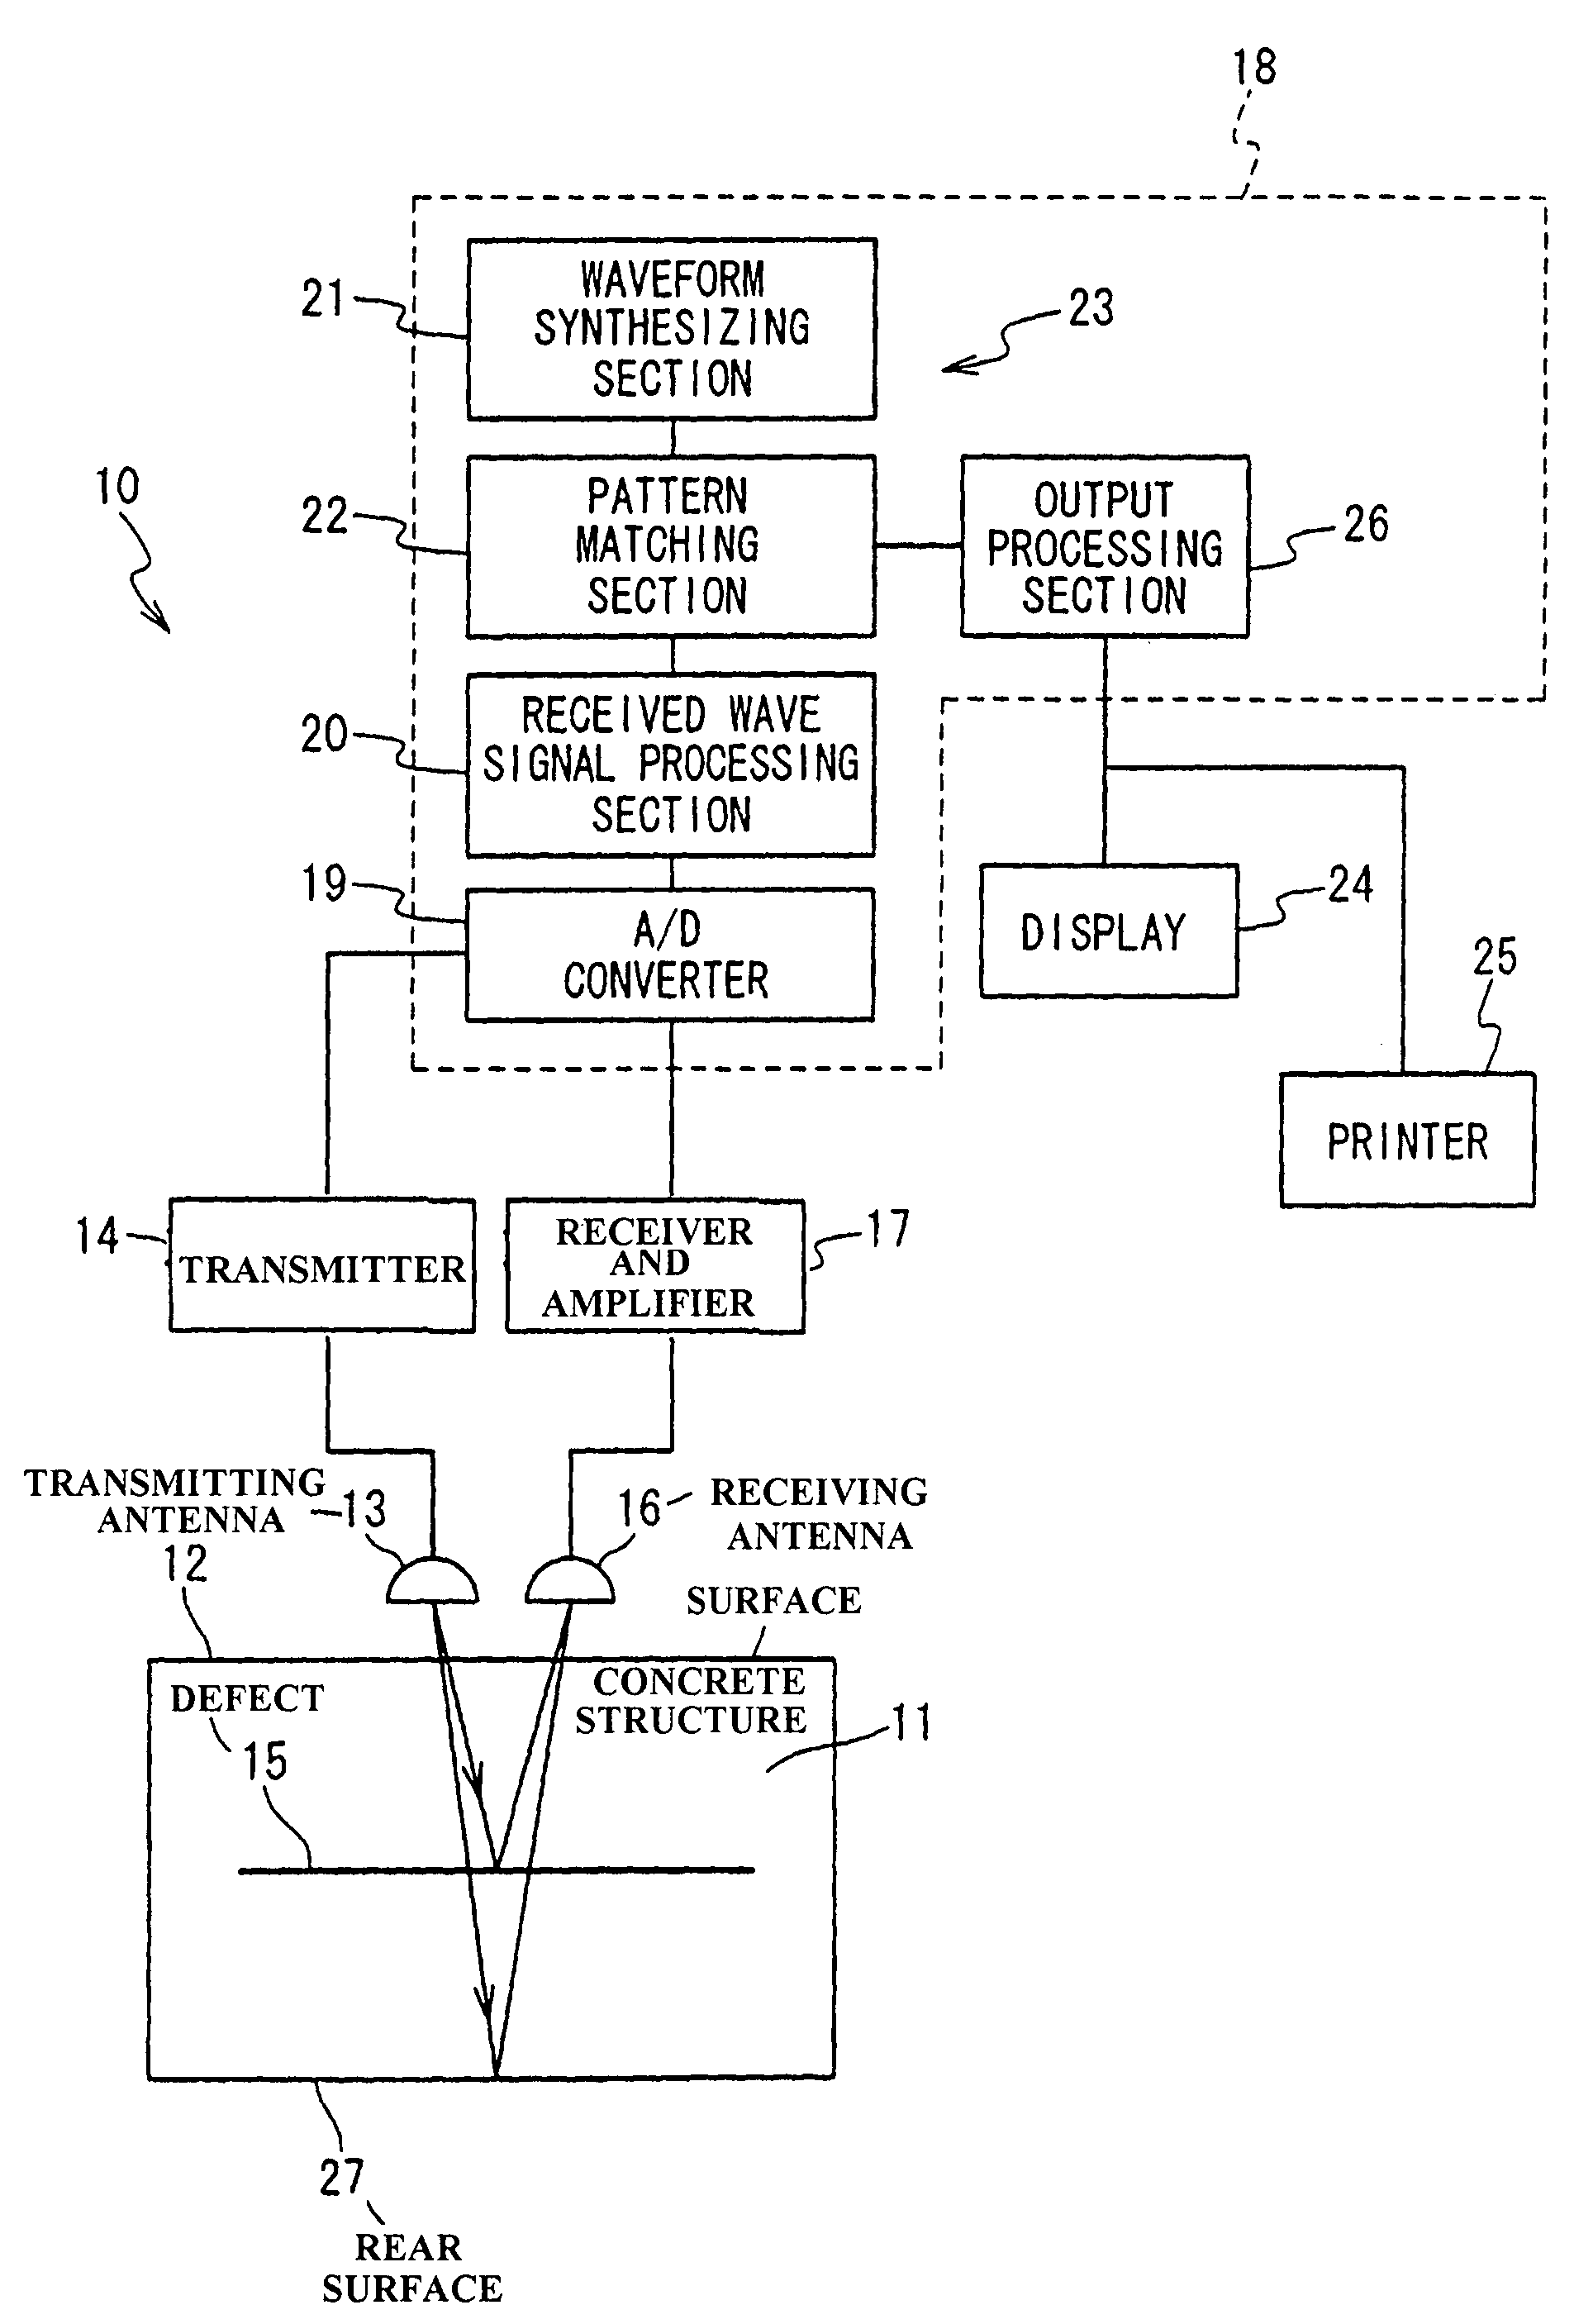 Apparatus and method for non-destructive inspection